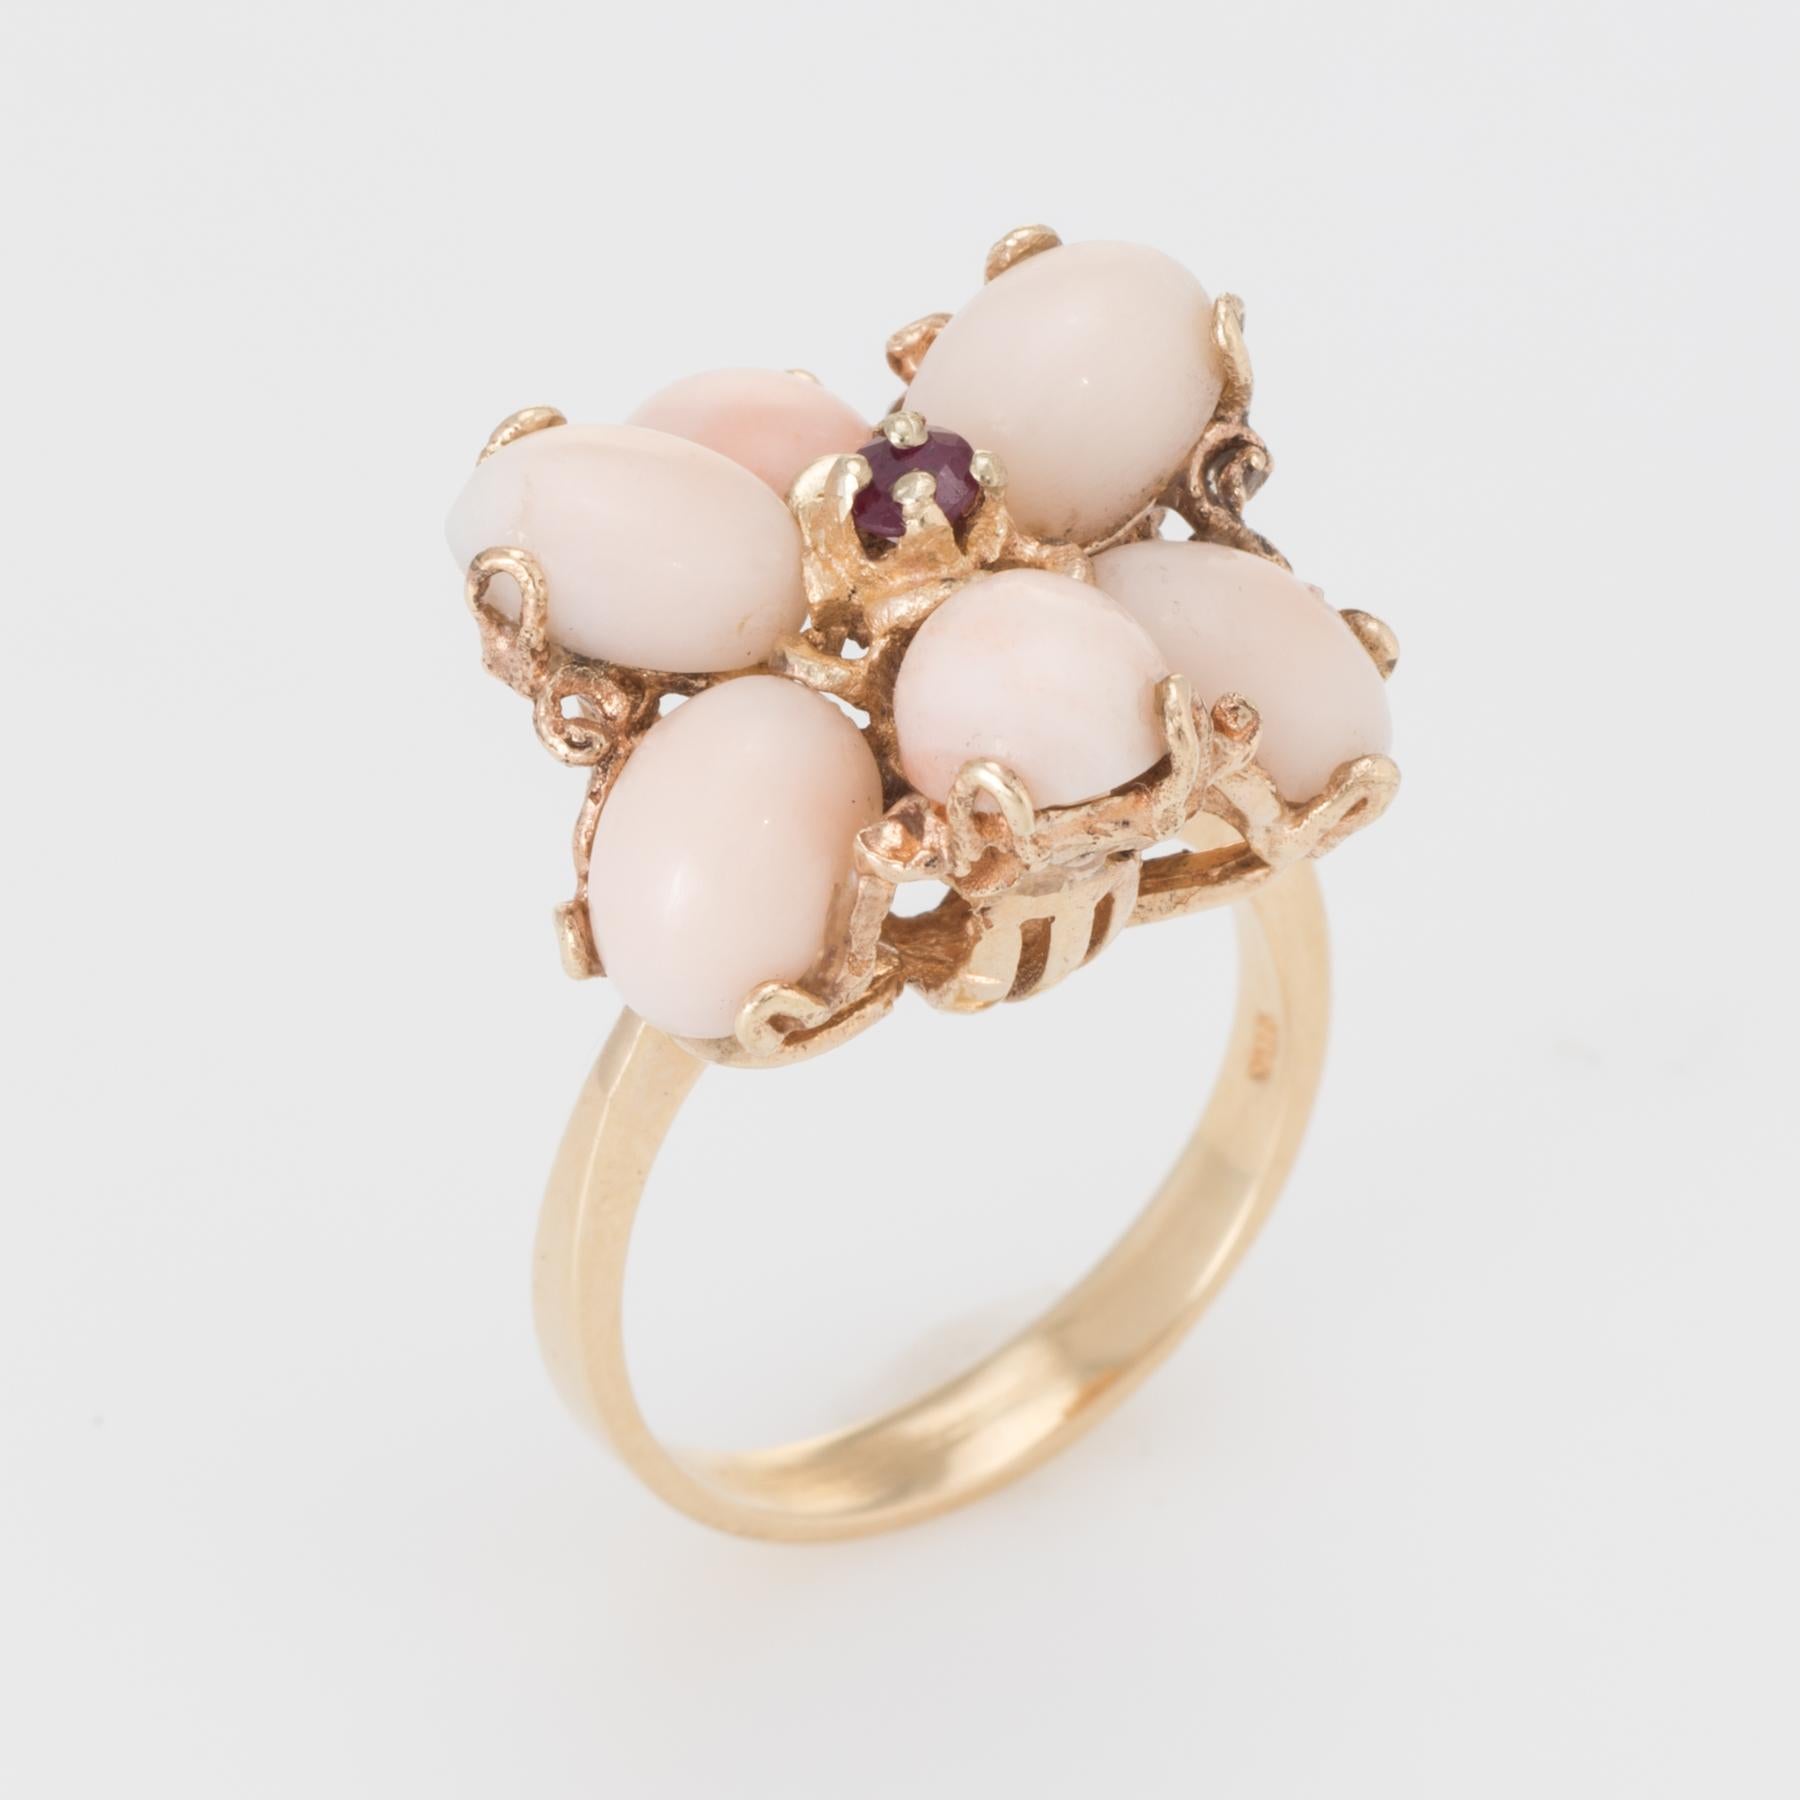 Distinct vintage cocktail ring (circa 1960s), crafted in 14 karat yellow gold. 

Angel skin coral each measures 8mm x 6mm (total estimated weight of 7.50 carats), accented with an estimated 0.05 carat ruby. The coral is in excellent condition and